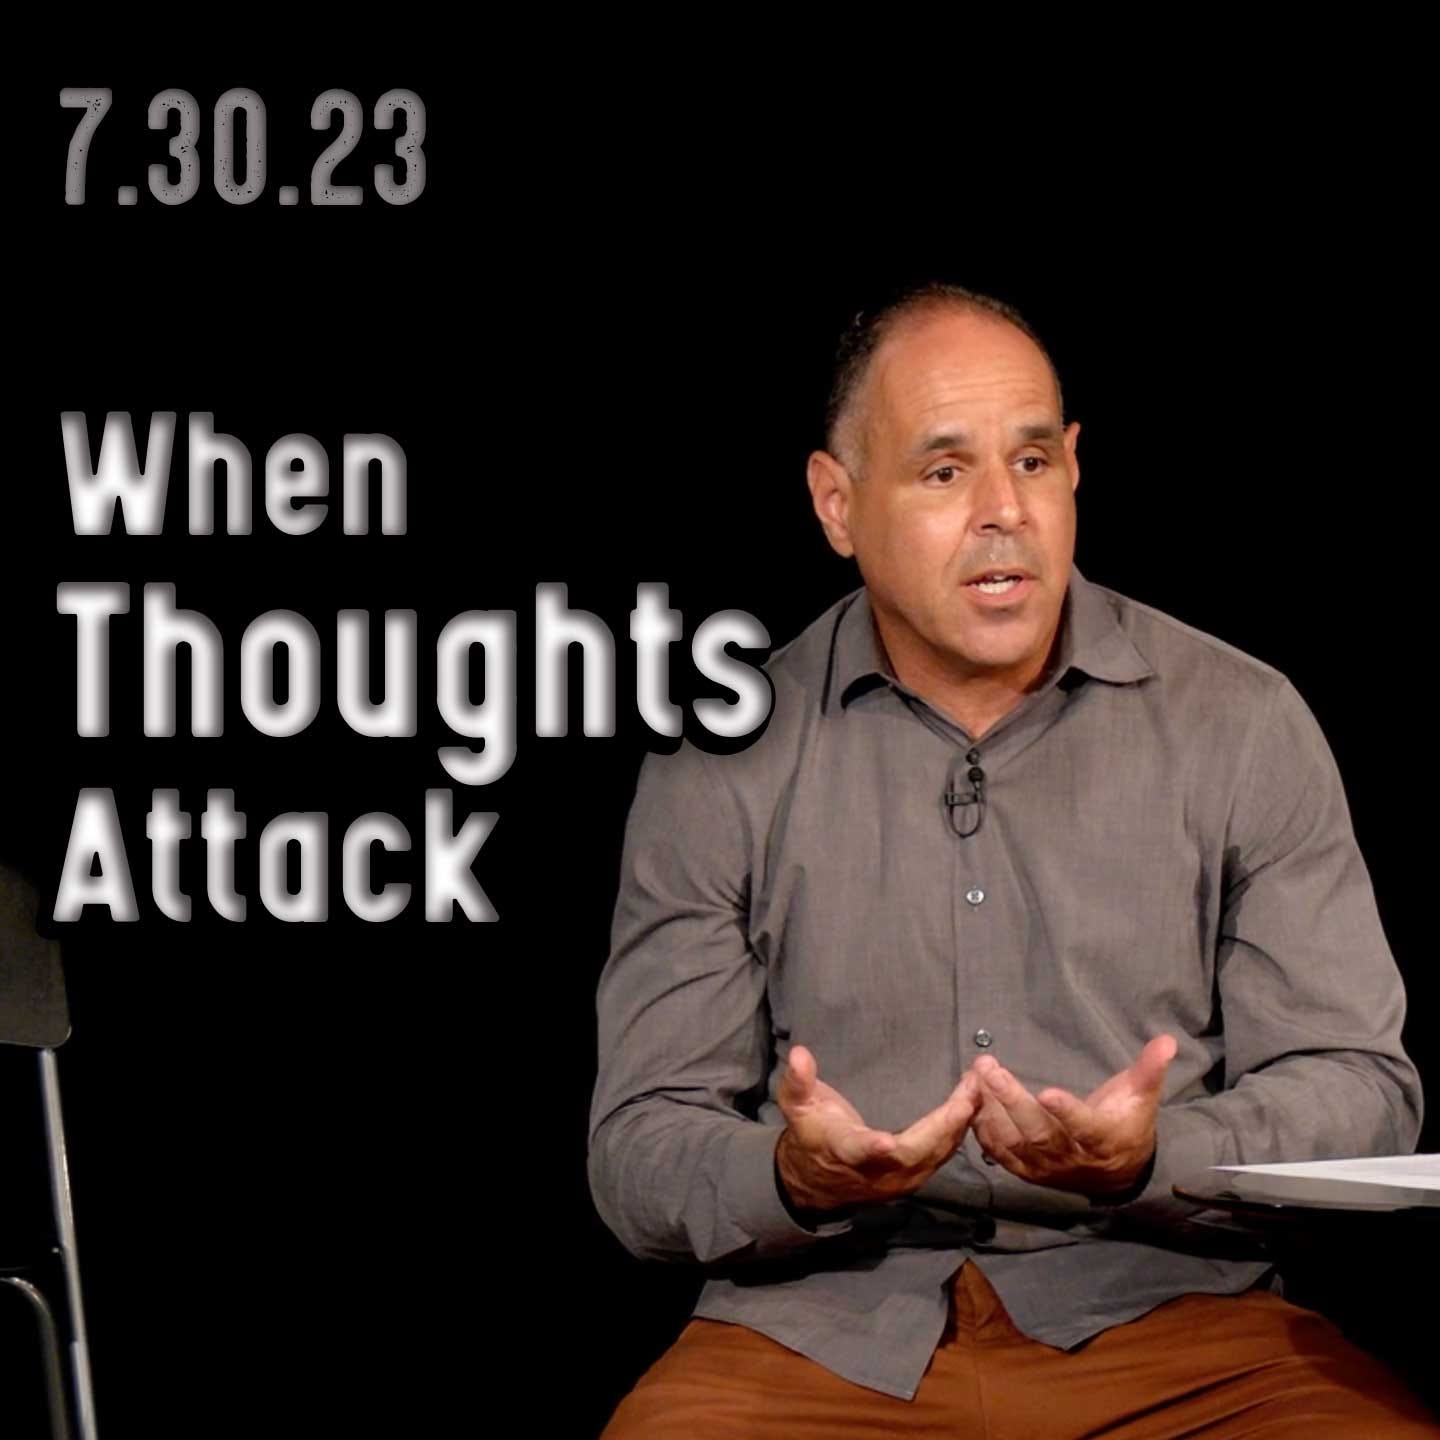 How Do You Deal with Thoughts? (Doug for JLP) | Church 7/30/23